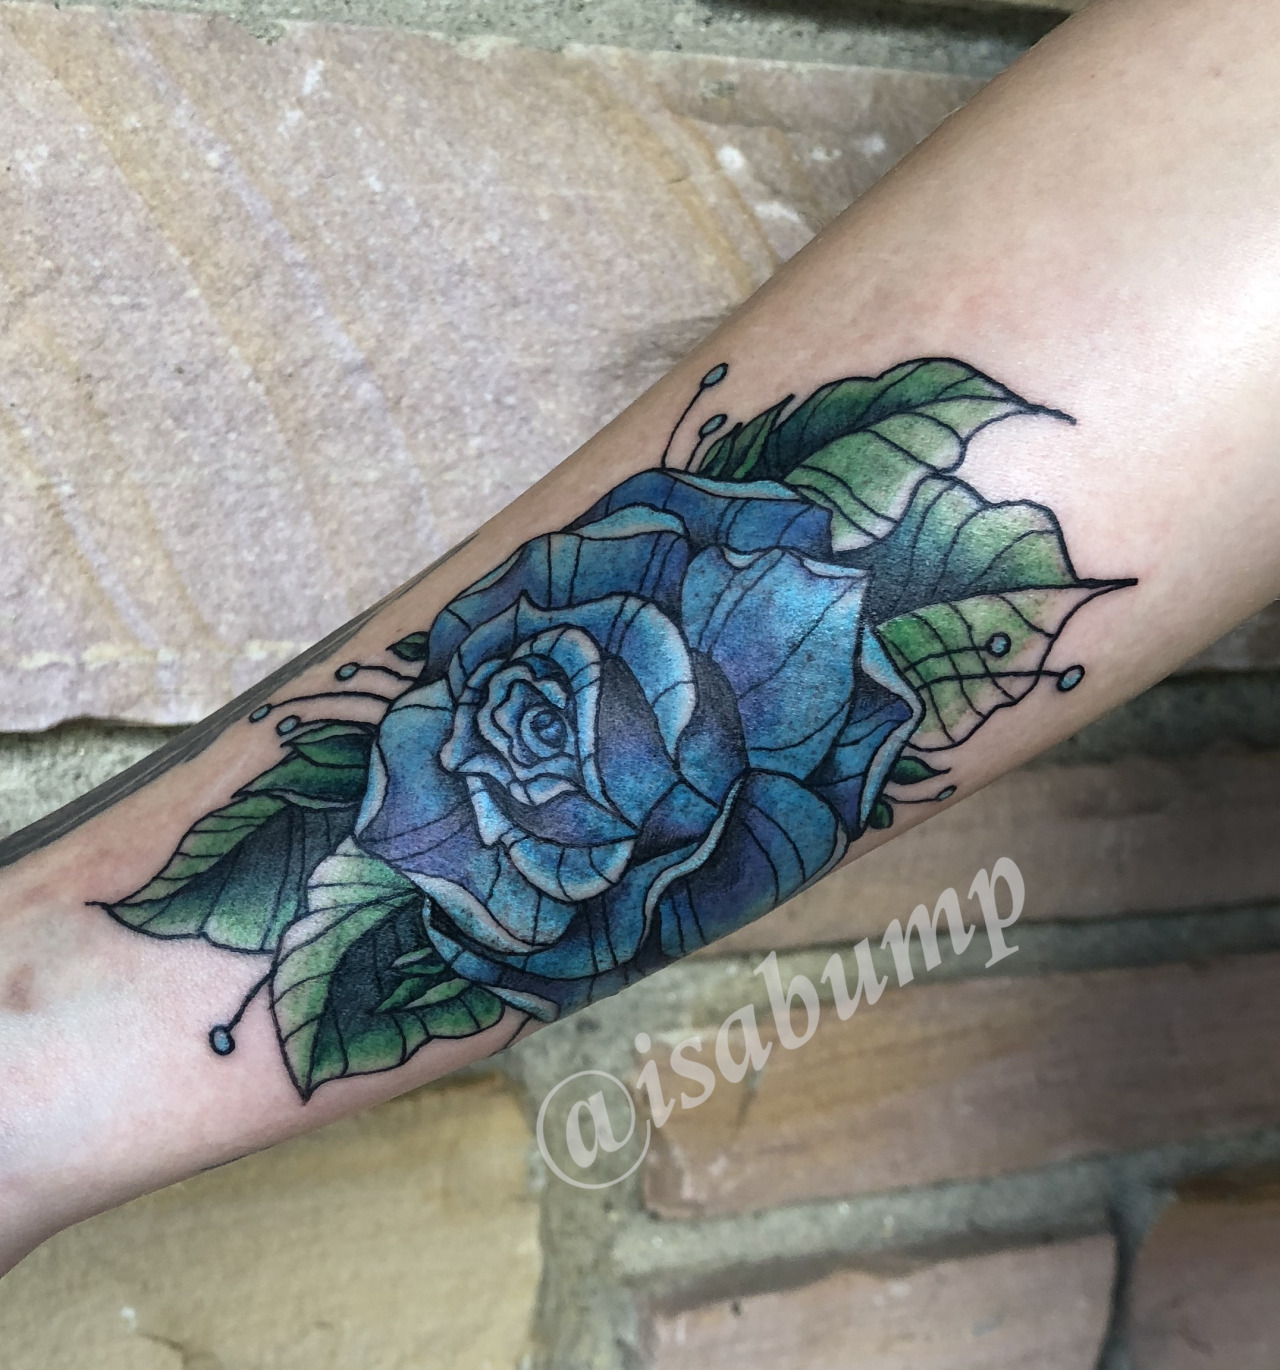 Blue Rose Tattoo Meaning: The Intricate Meanings Behind Popular Tattoo Styles and Symbols